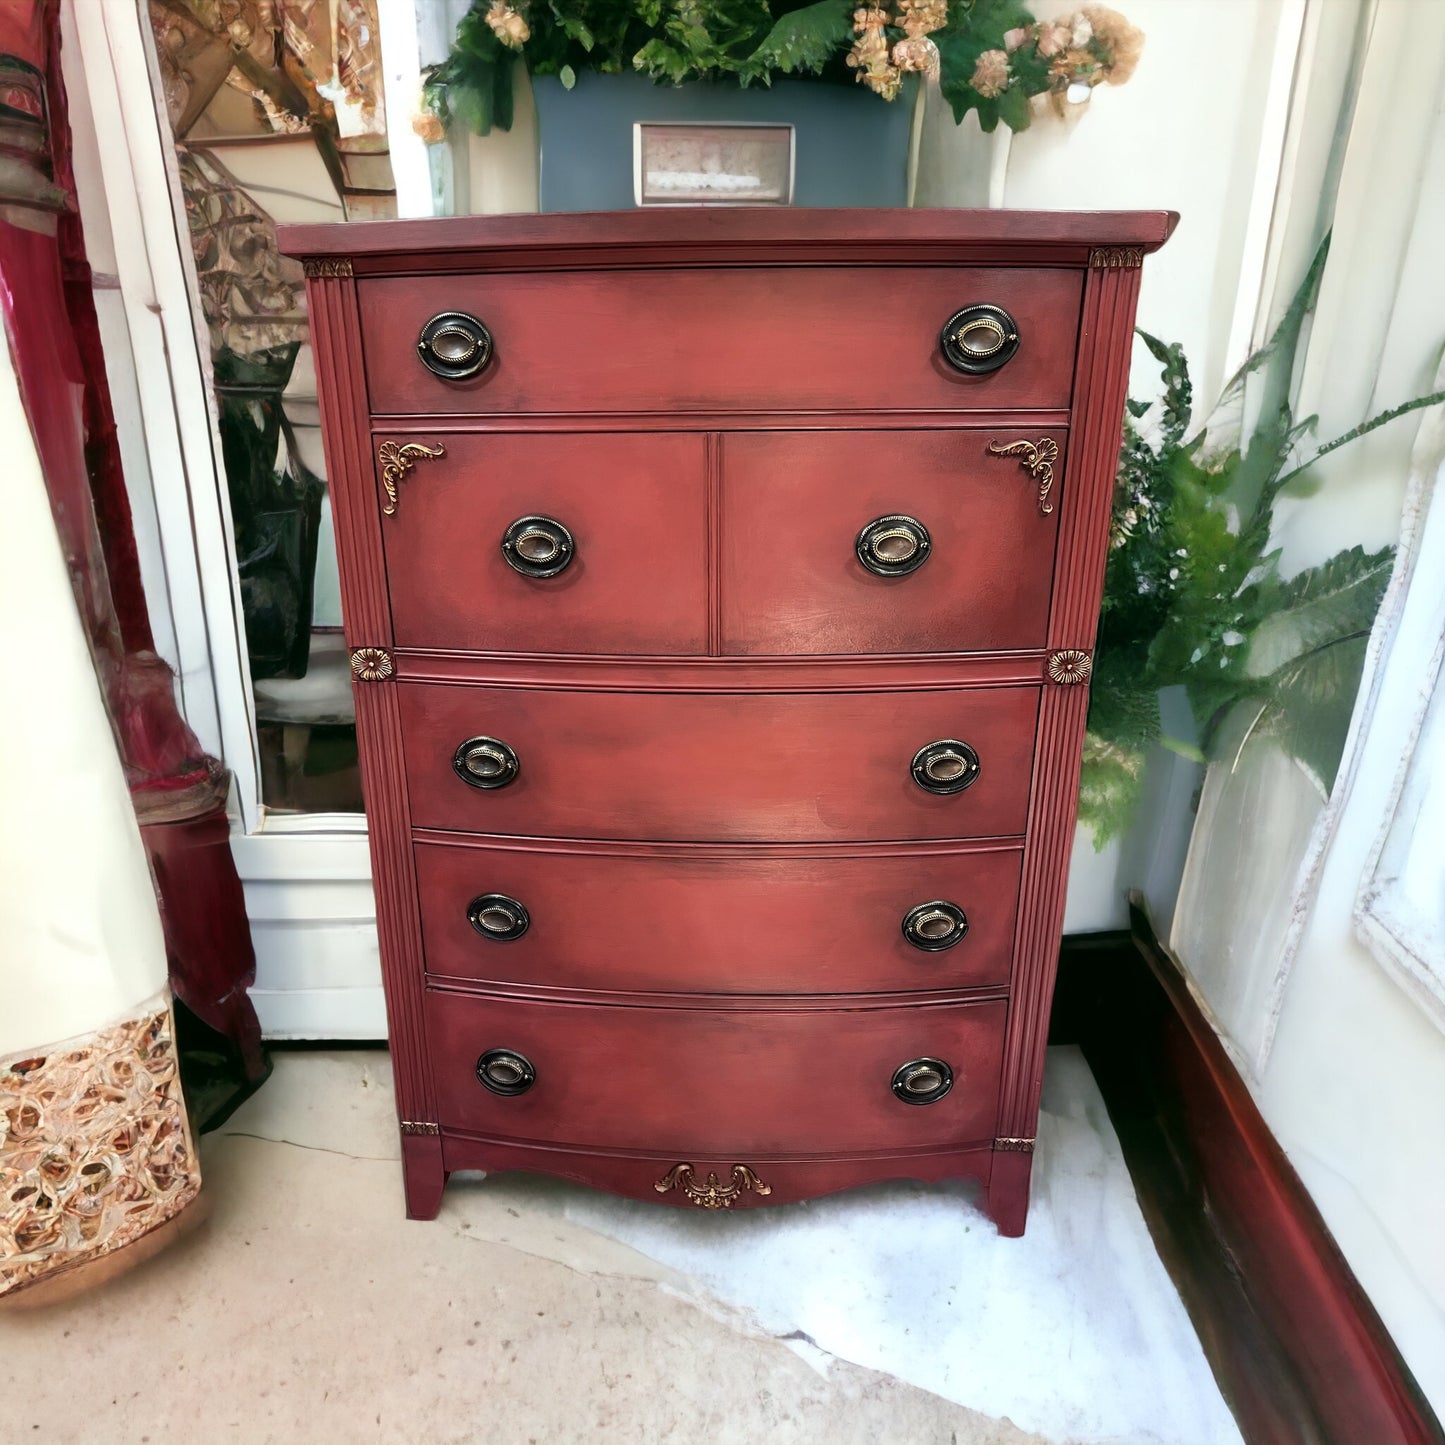 Stunning Solid Mahogany Chest of Drawers hand painted with Annie Sloan Chalk paint in a mix of Emperor's Silk and Honfleur. Stunning.